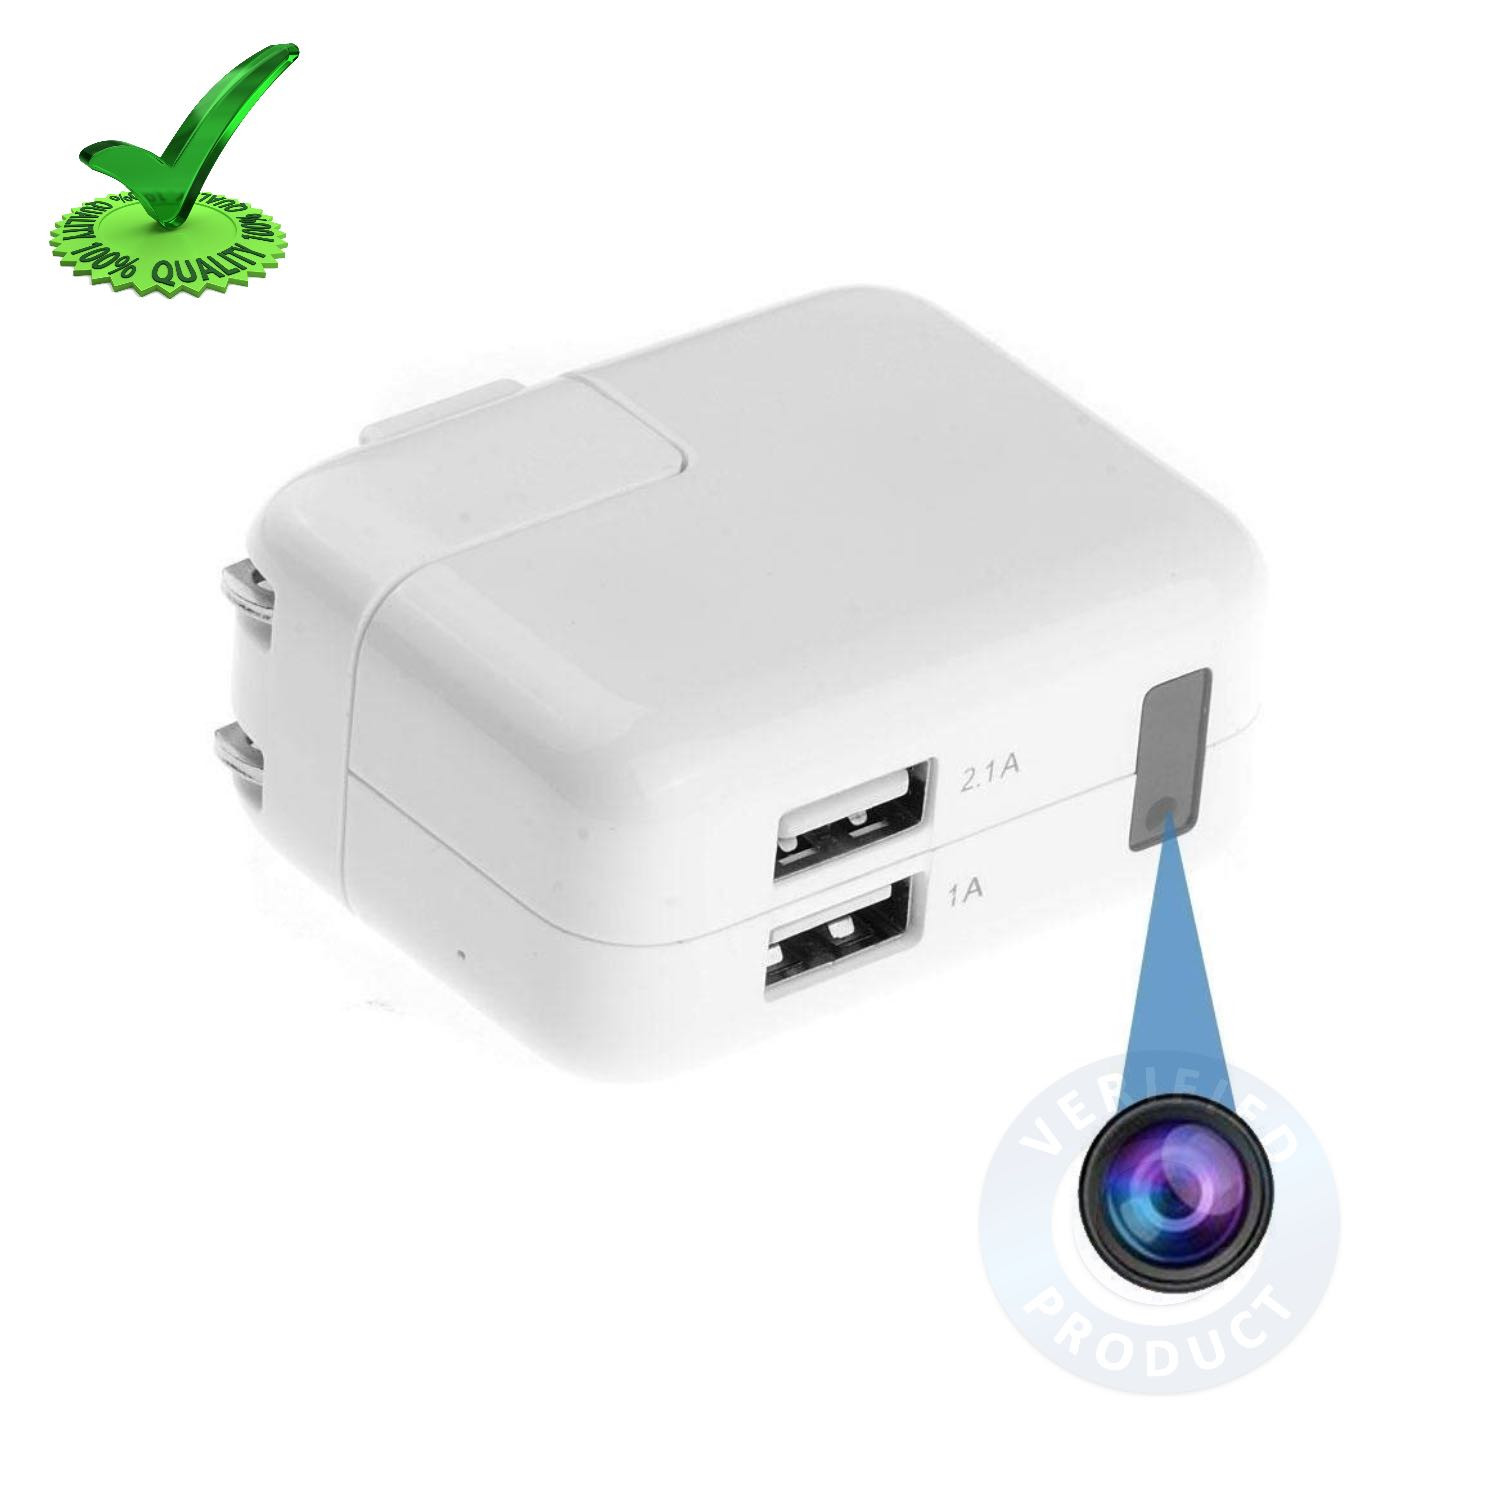 4k Wi-Fi Hidden Spy Camera with Recorder in Apple Usb Charger